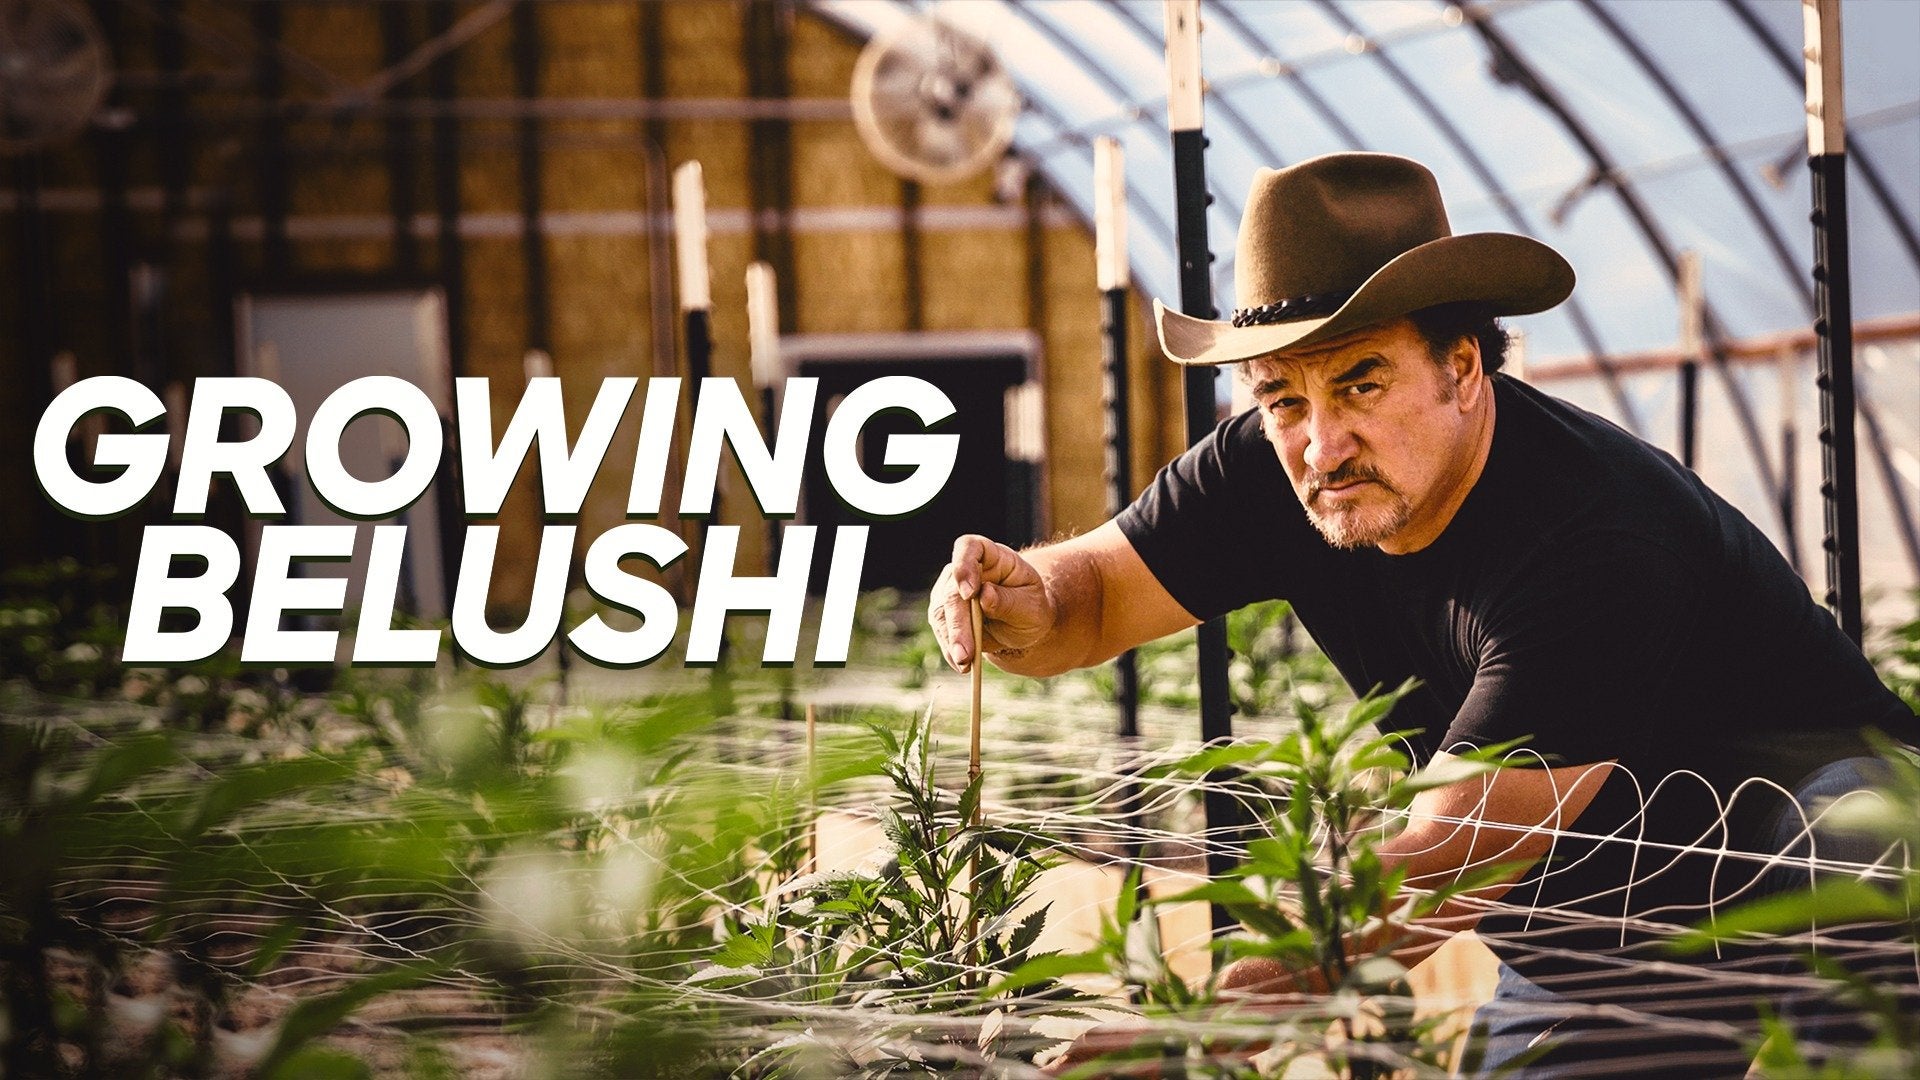 Growing Belushi S02E01 720p  The Buds are Back in Town